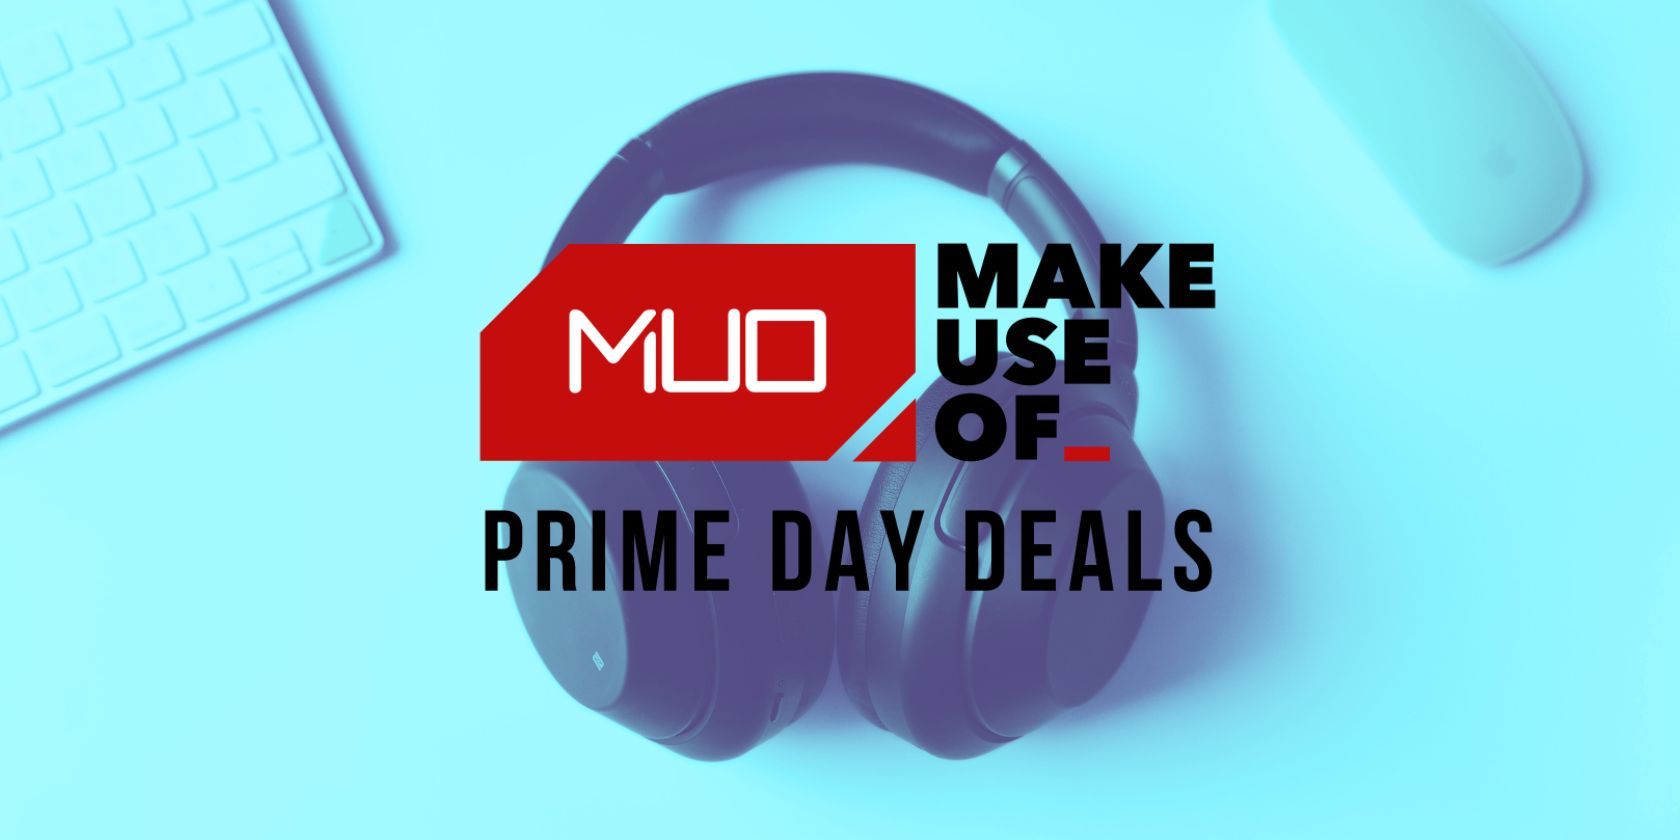 Tai nghe Earbuds Prime Day